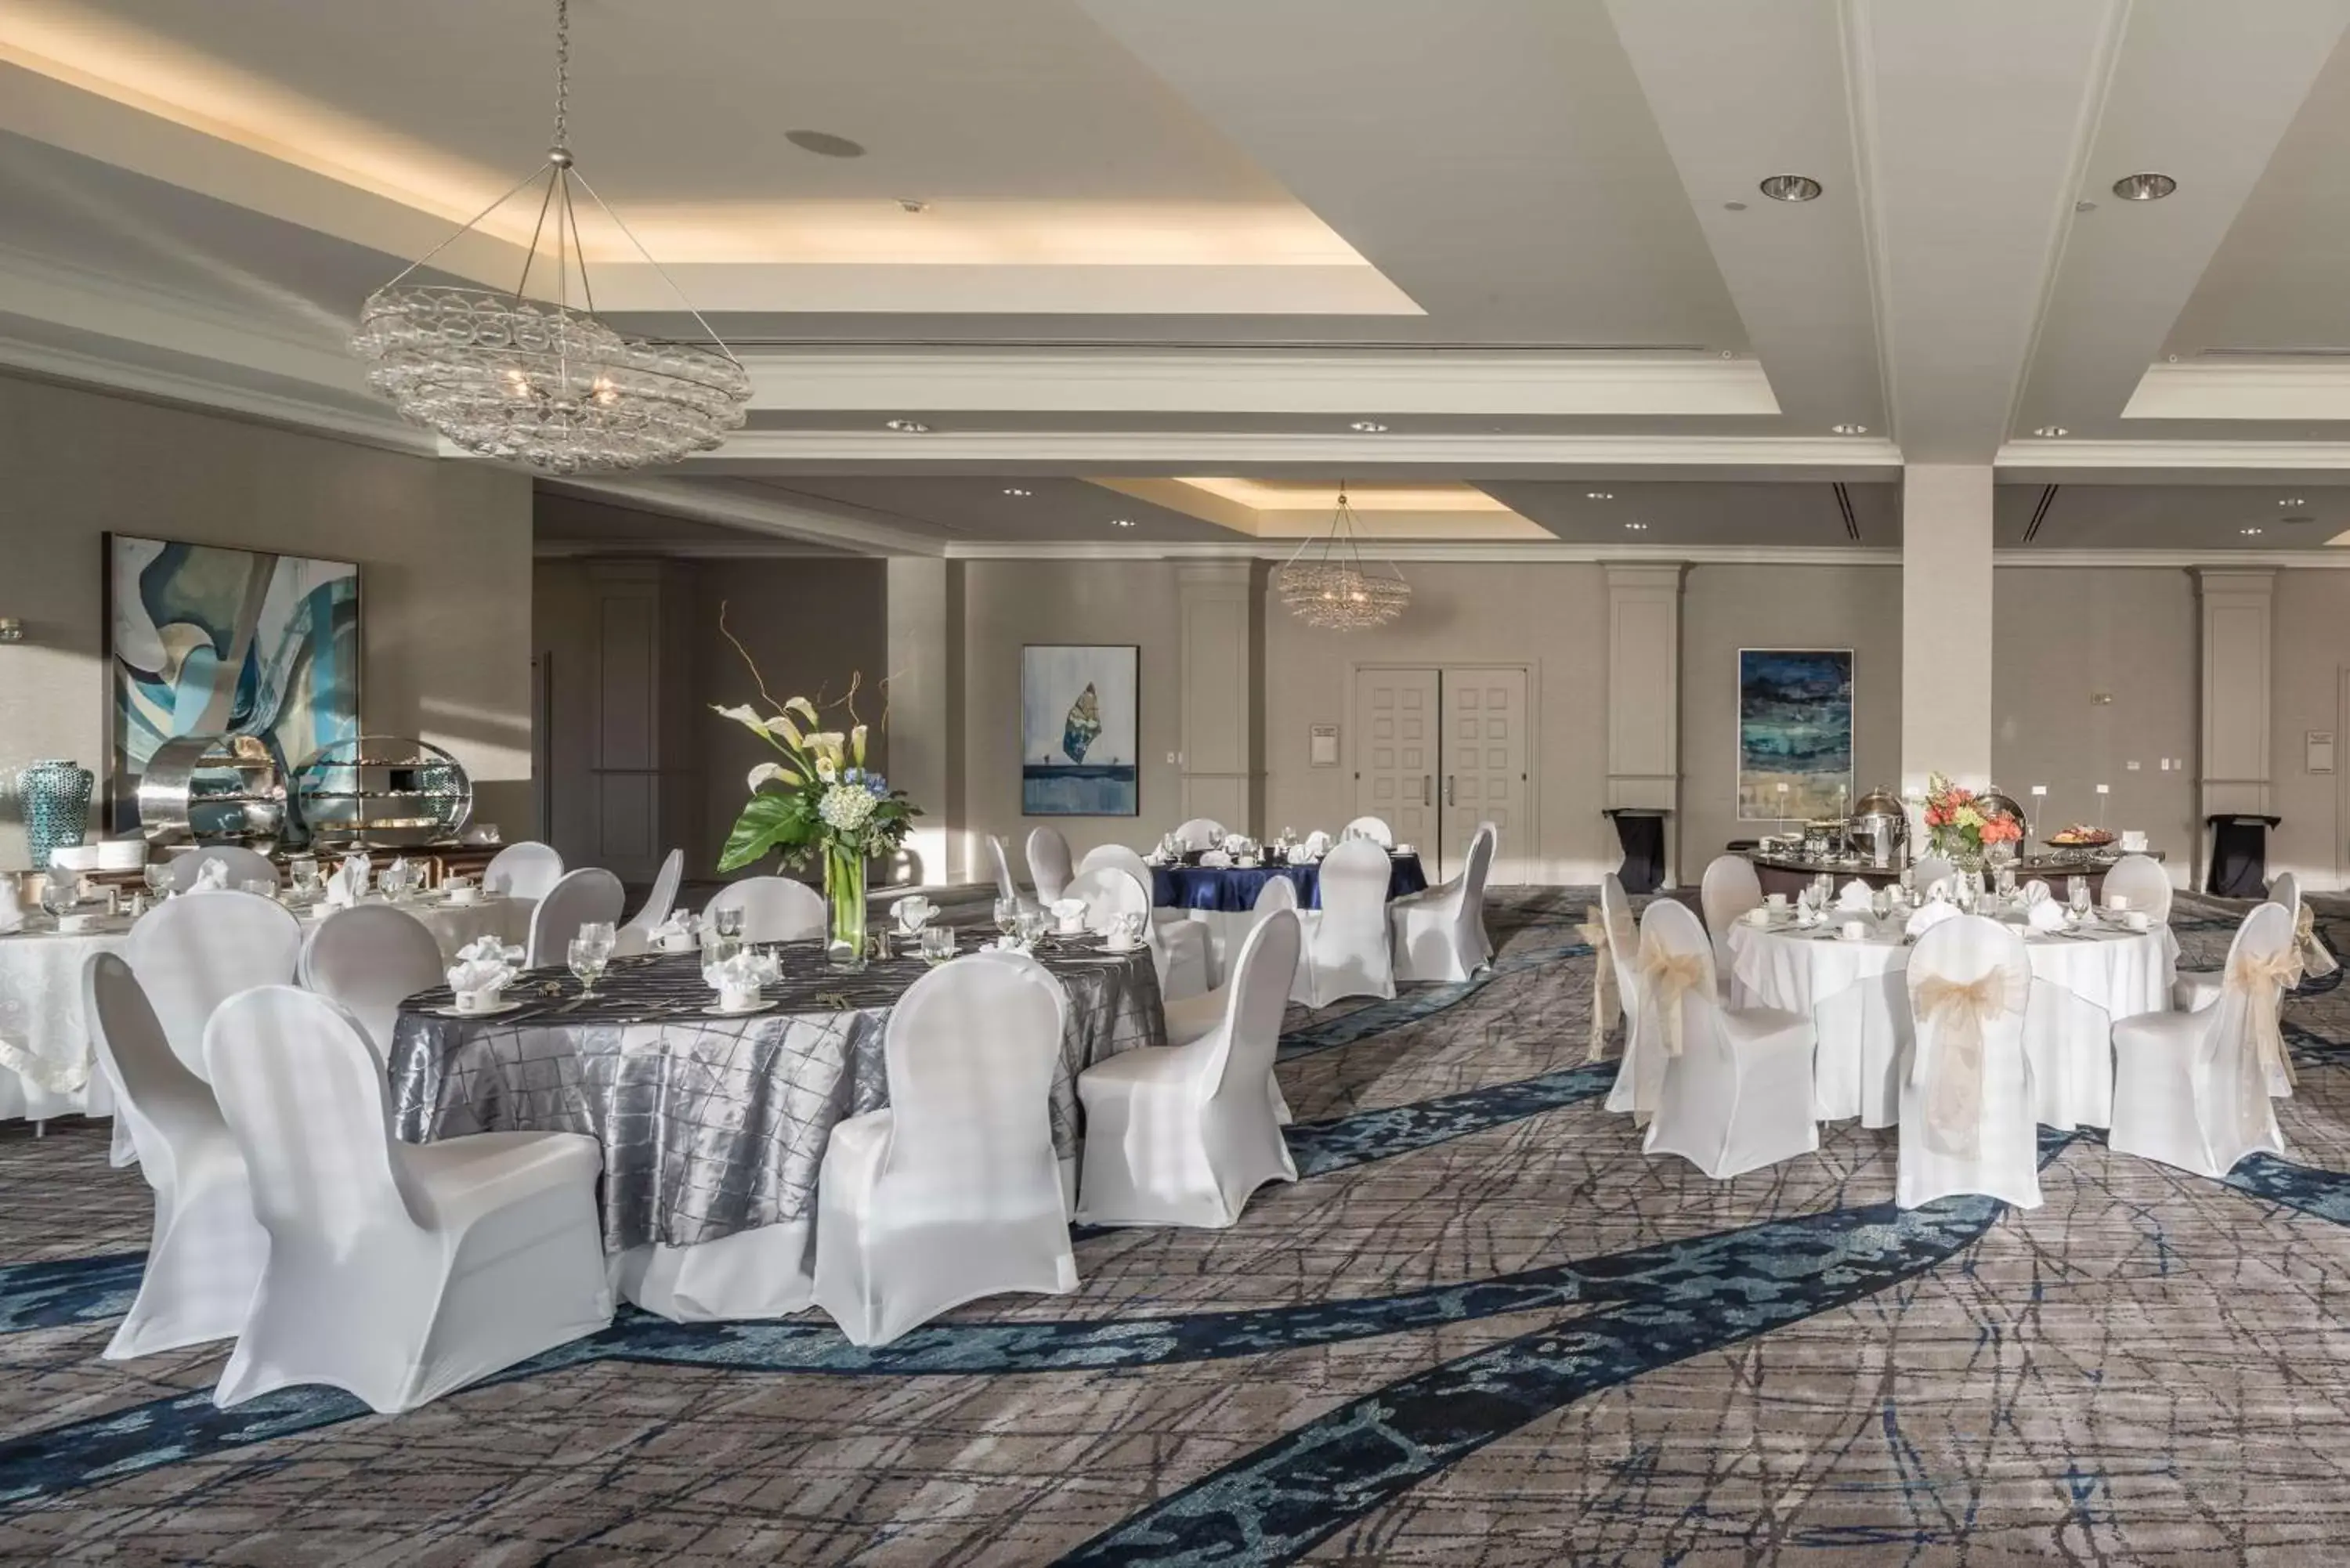 Meeting/conference room, Banquet Facilities in Hilton Dallas/Rockwall Lakefront Hotel